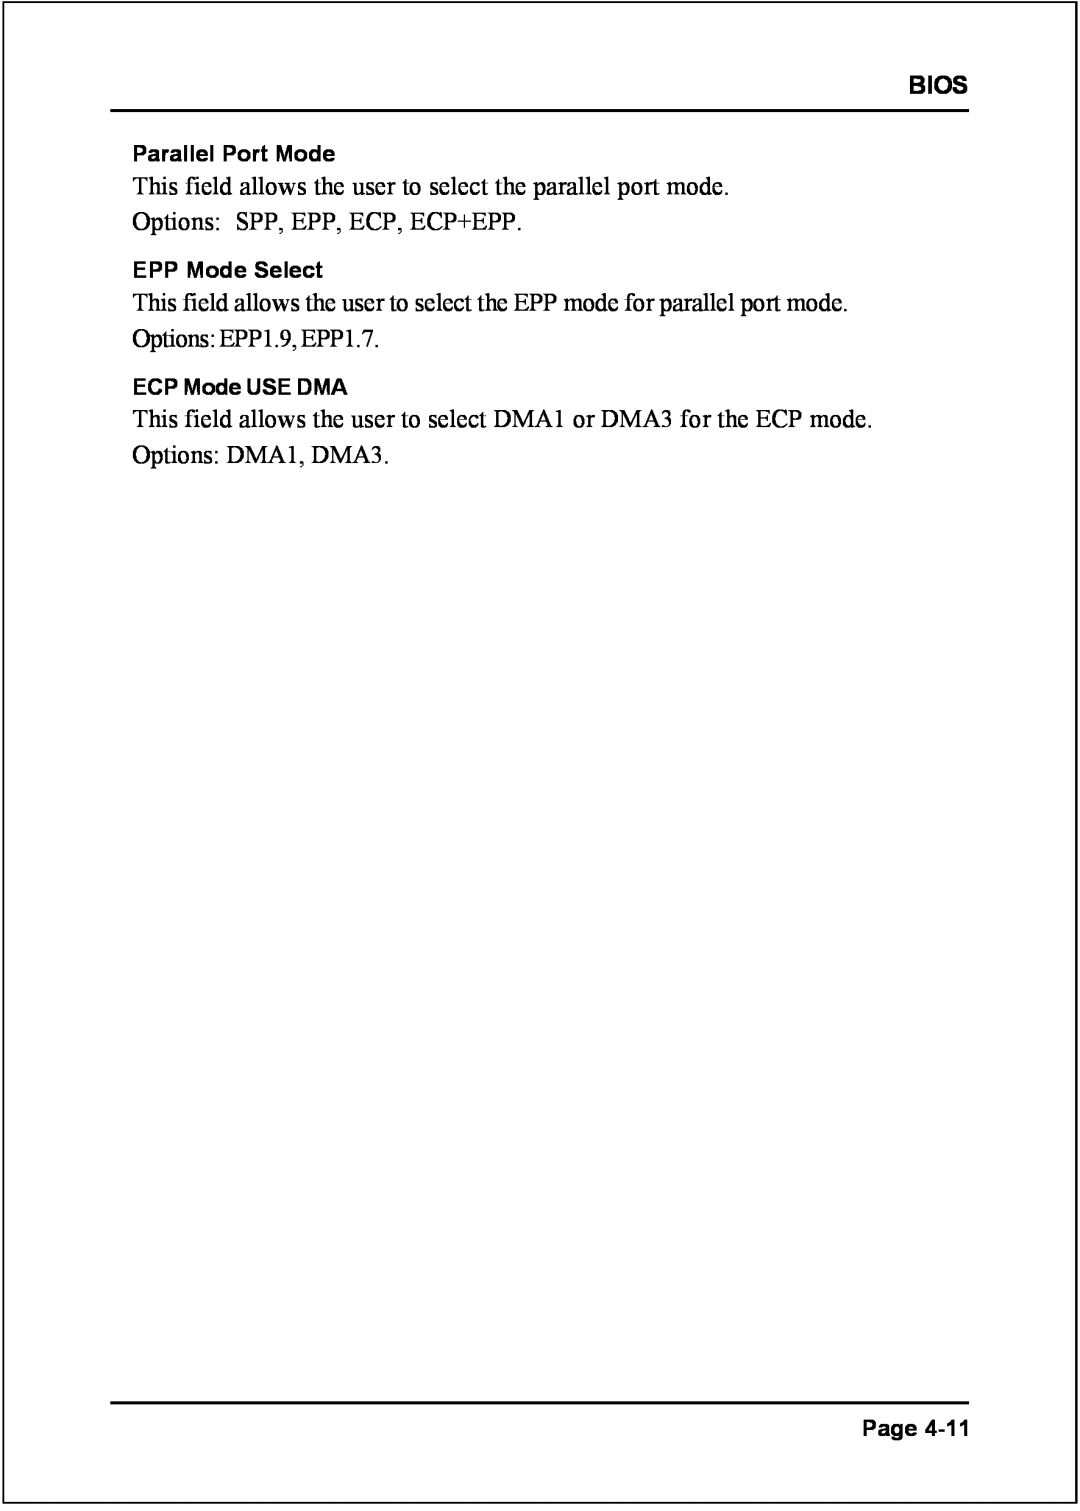 Intel I945P specifications Bios, Parallel Port Mode, EPP Mode Select, ECP Mode USE DMA, Page 